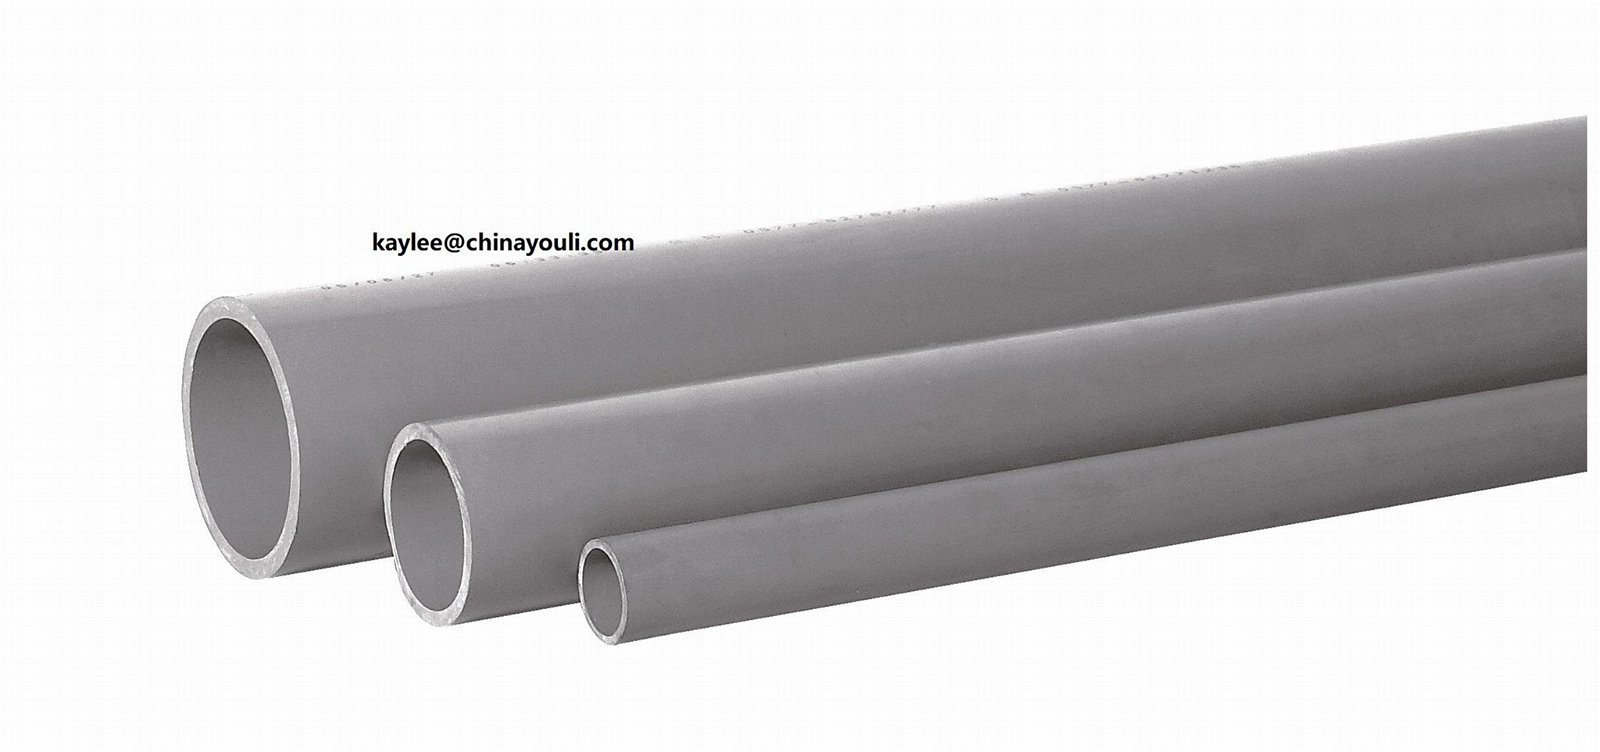 sch40, 80,120 CPVC/UPVC pipes and fittings 3